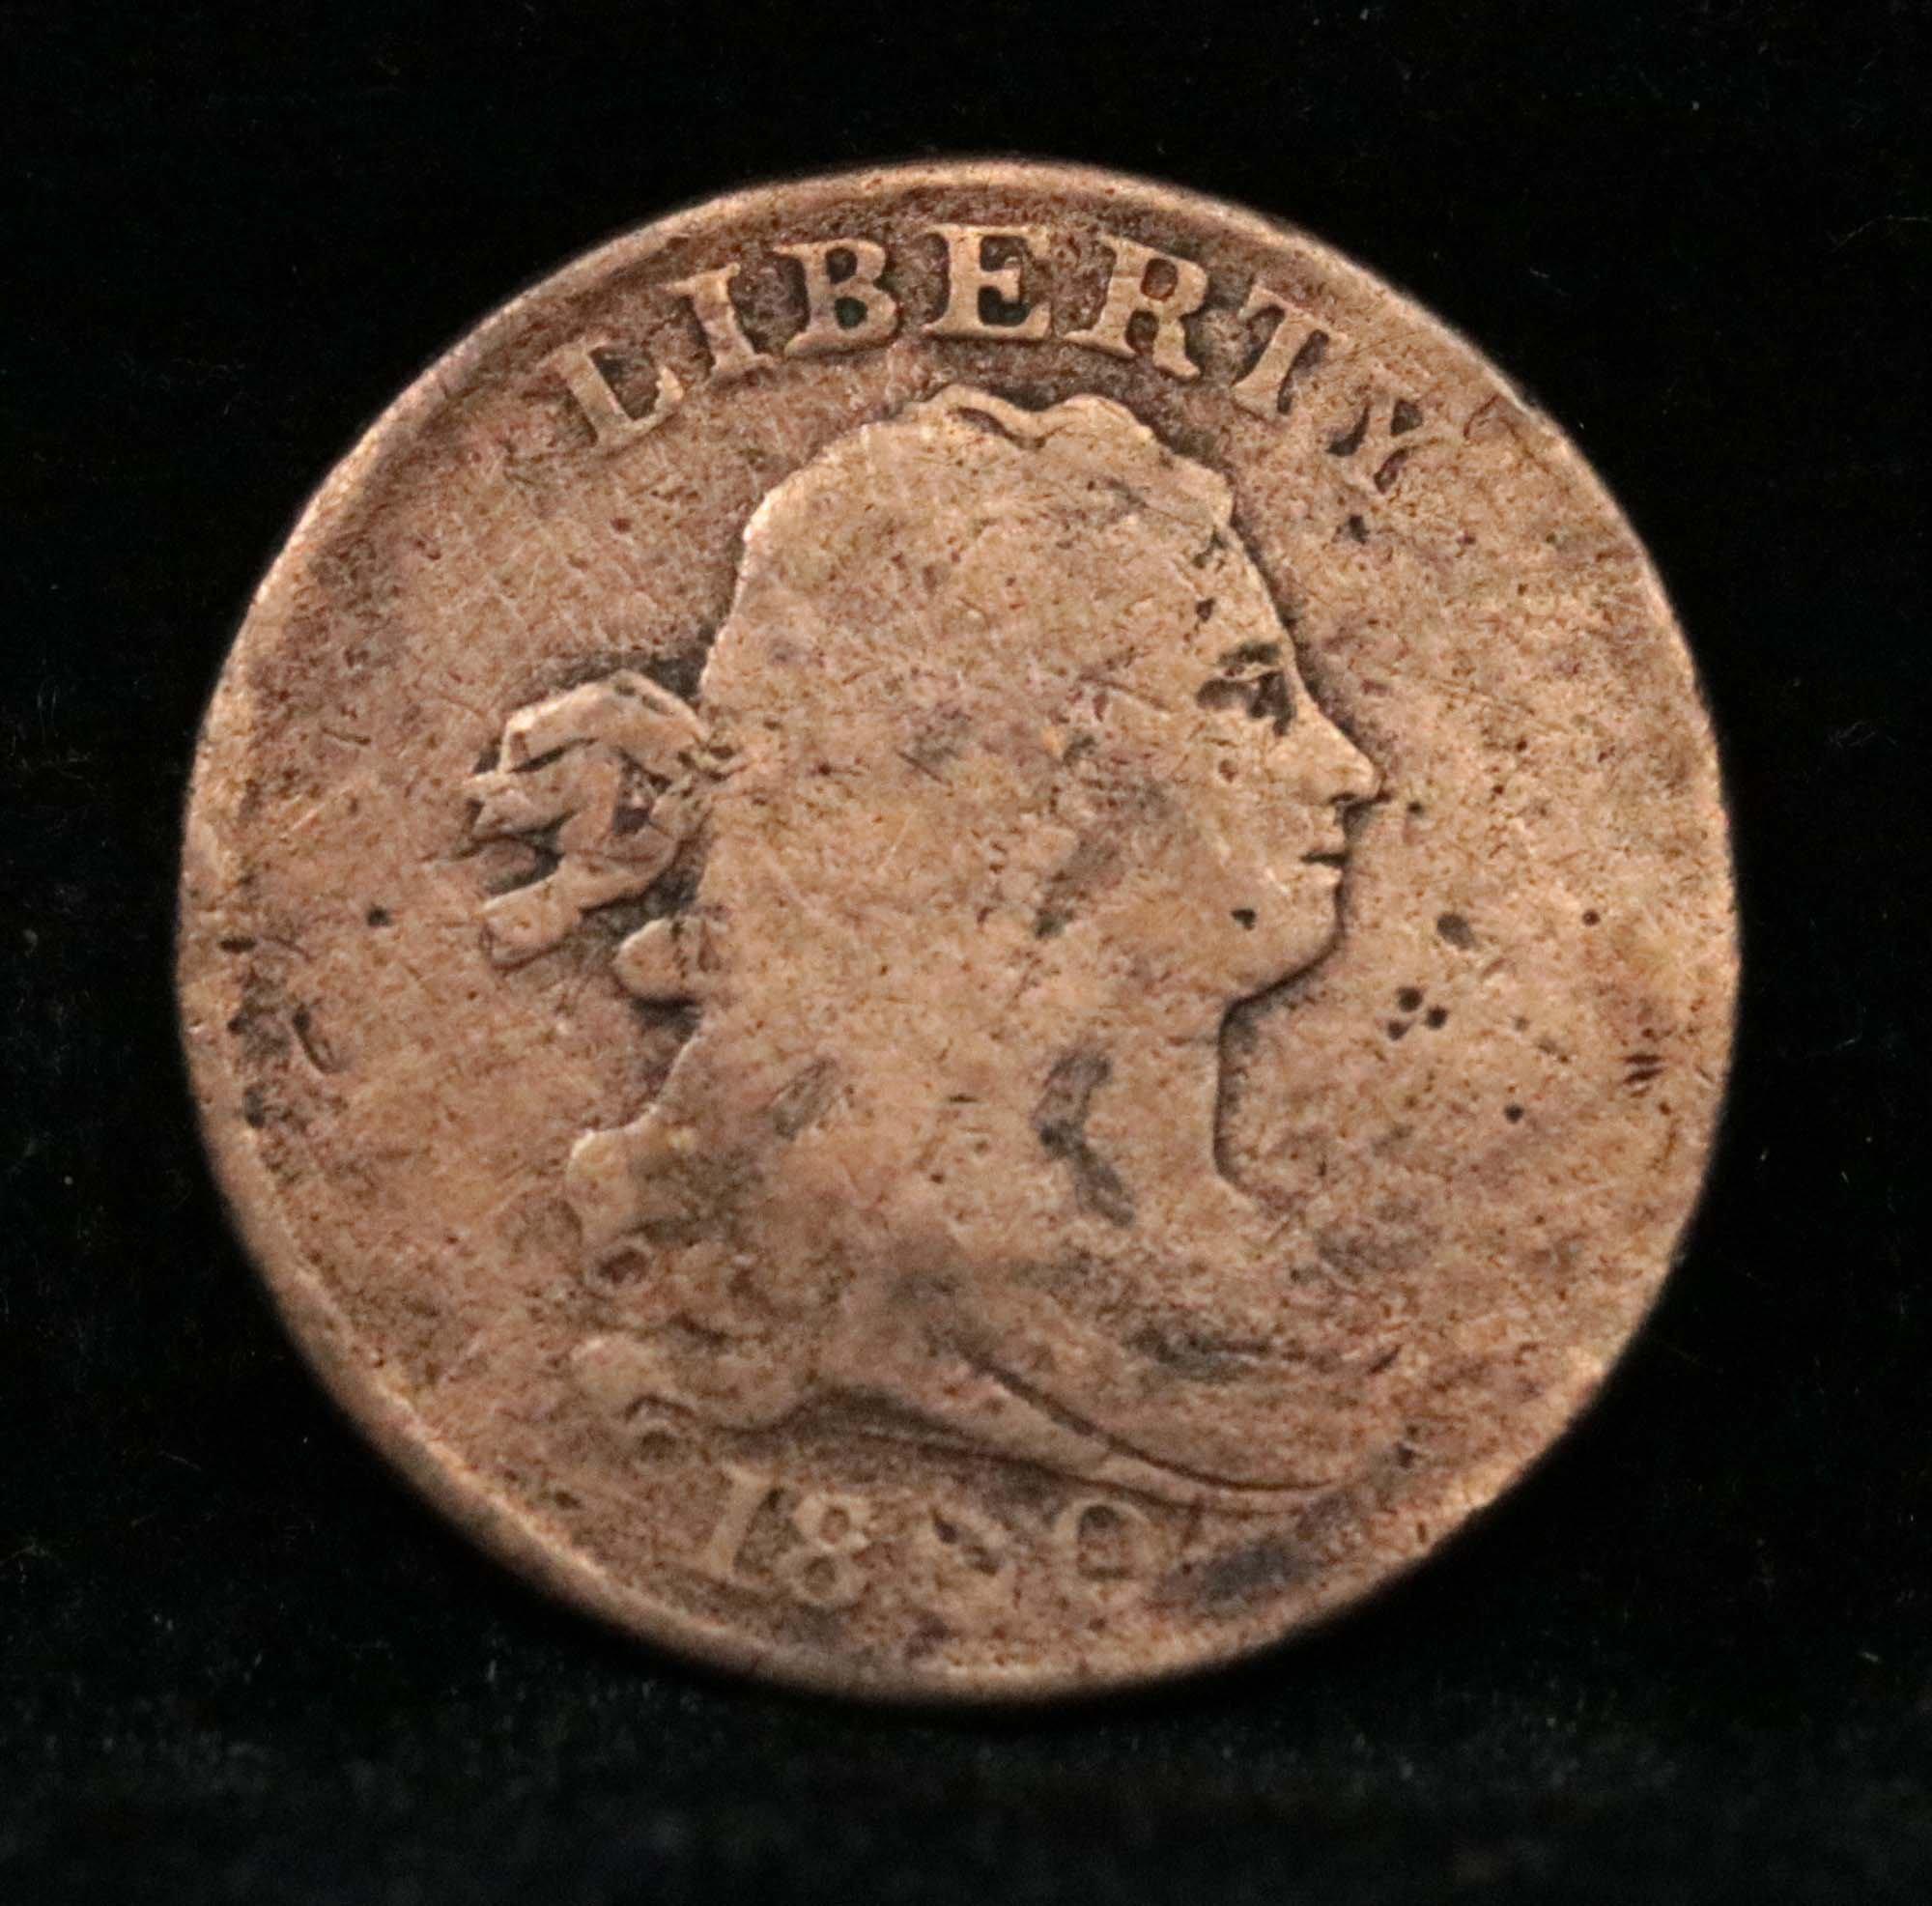 1800 Draped Bust Half Cent 1/2c Grades g, good Early draped bust 1/2 cent